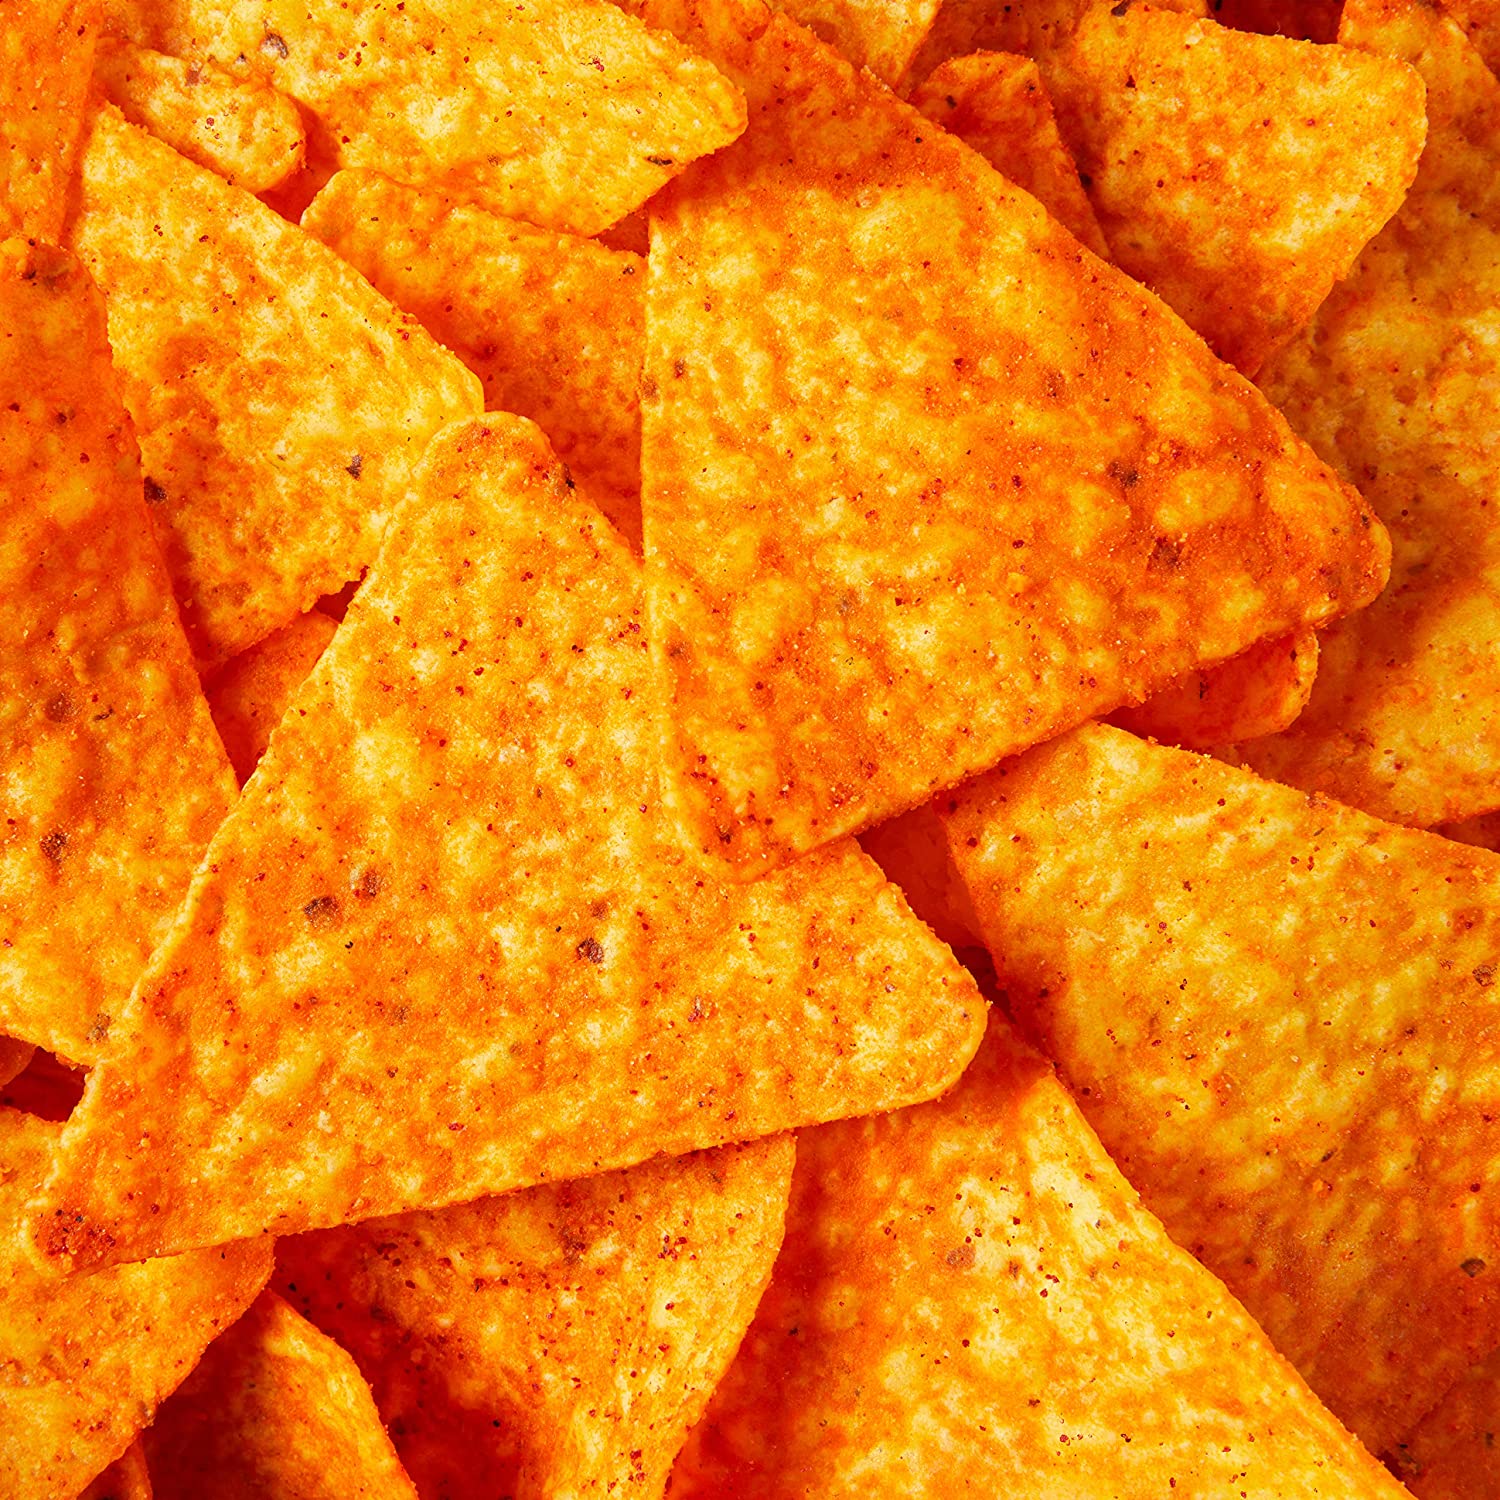 Doritos Flavored Tortilla Chip Variety Pack, 40 Count - image 4 of 6